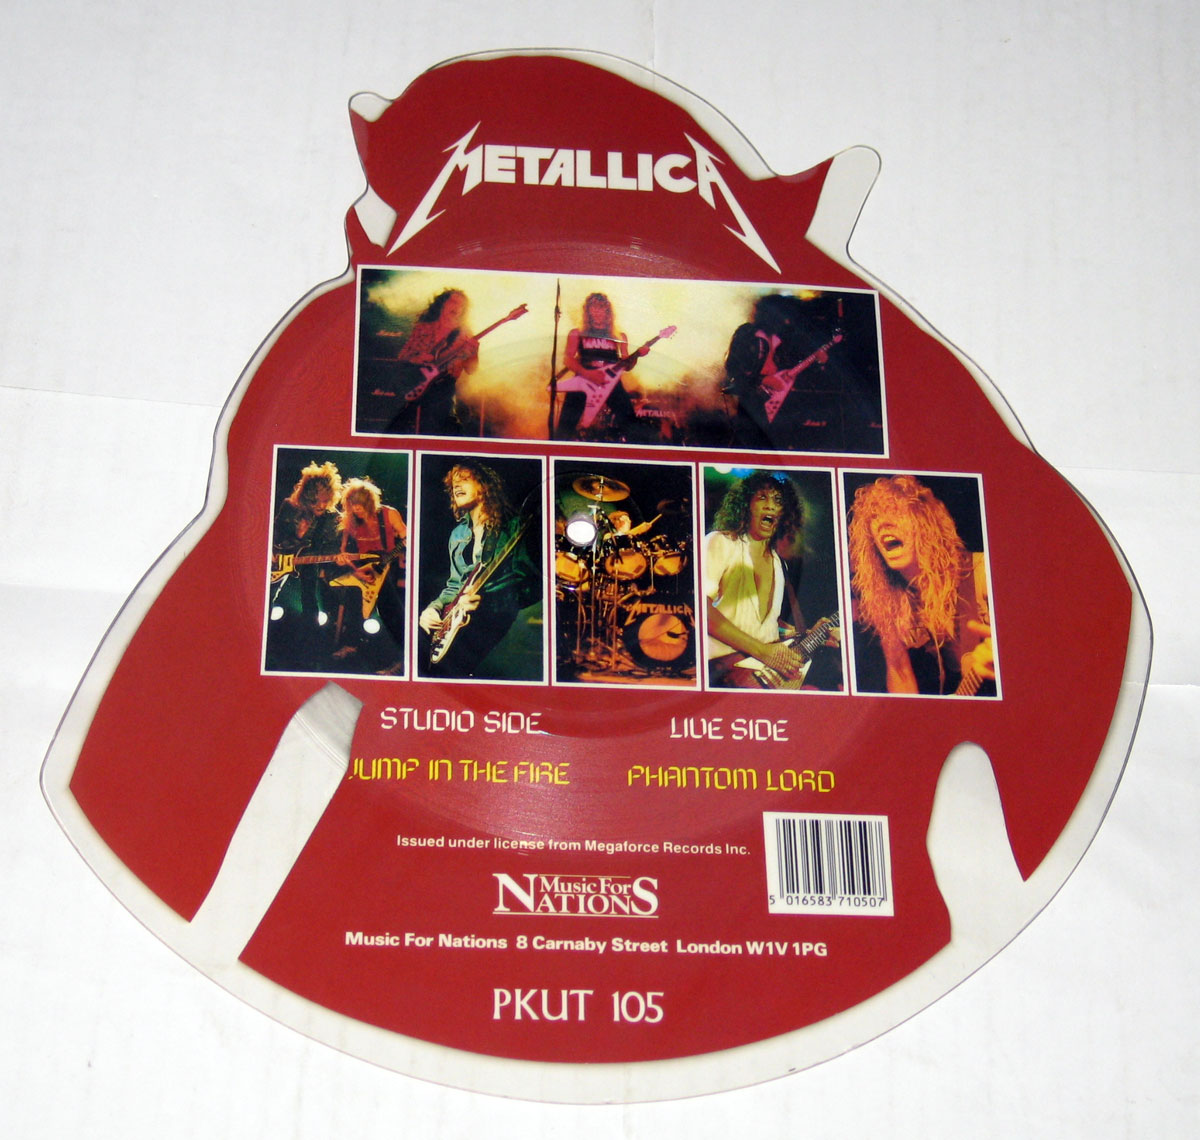 High Resolution Photo Metallica Jump In The Fire Shaped Picture Disc Vinyl Record